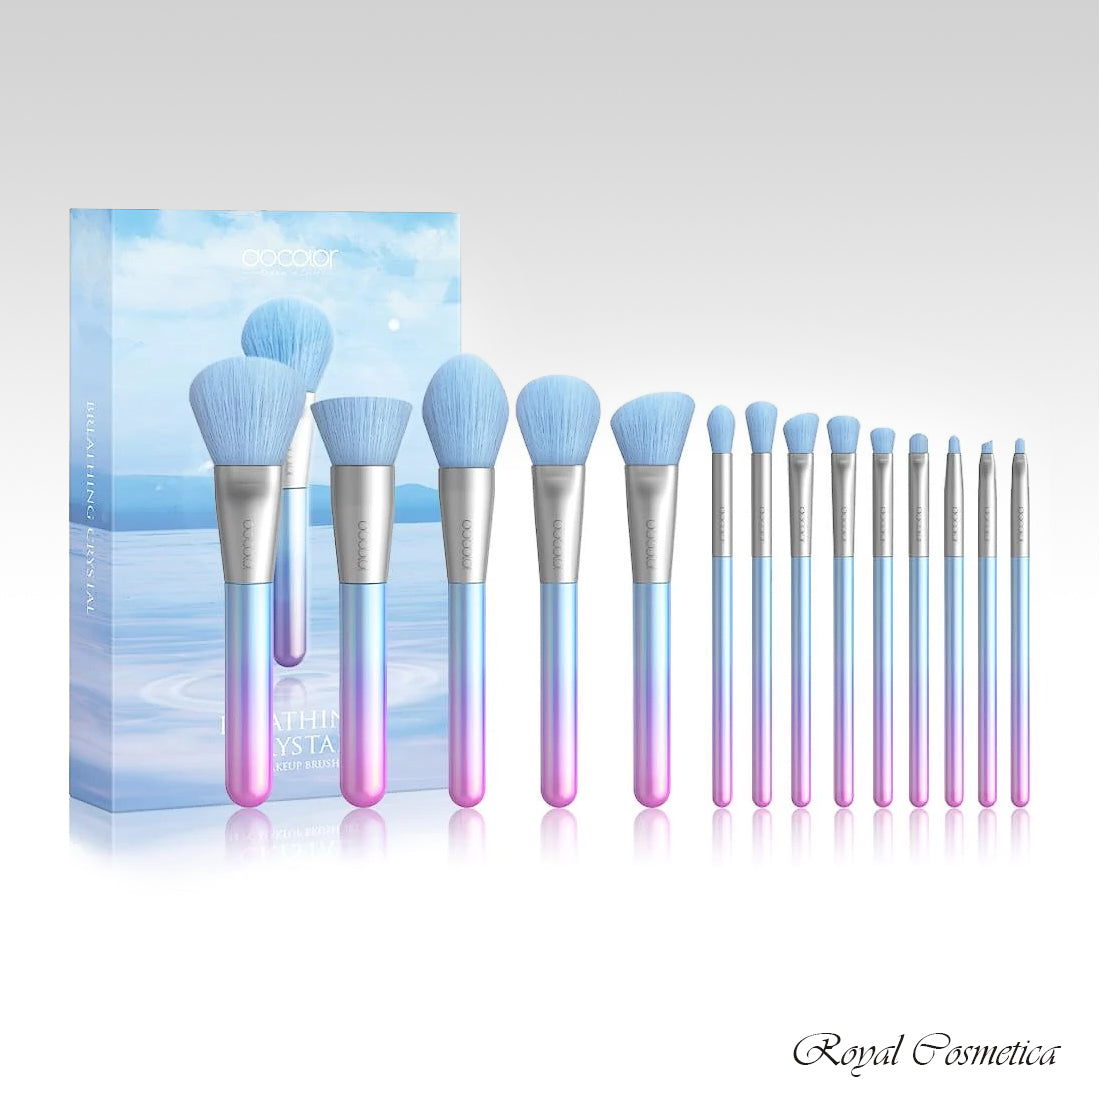 Docolor Breathing Crystal Makeup Brushes - 14pc